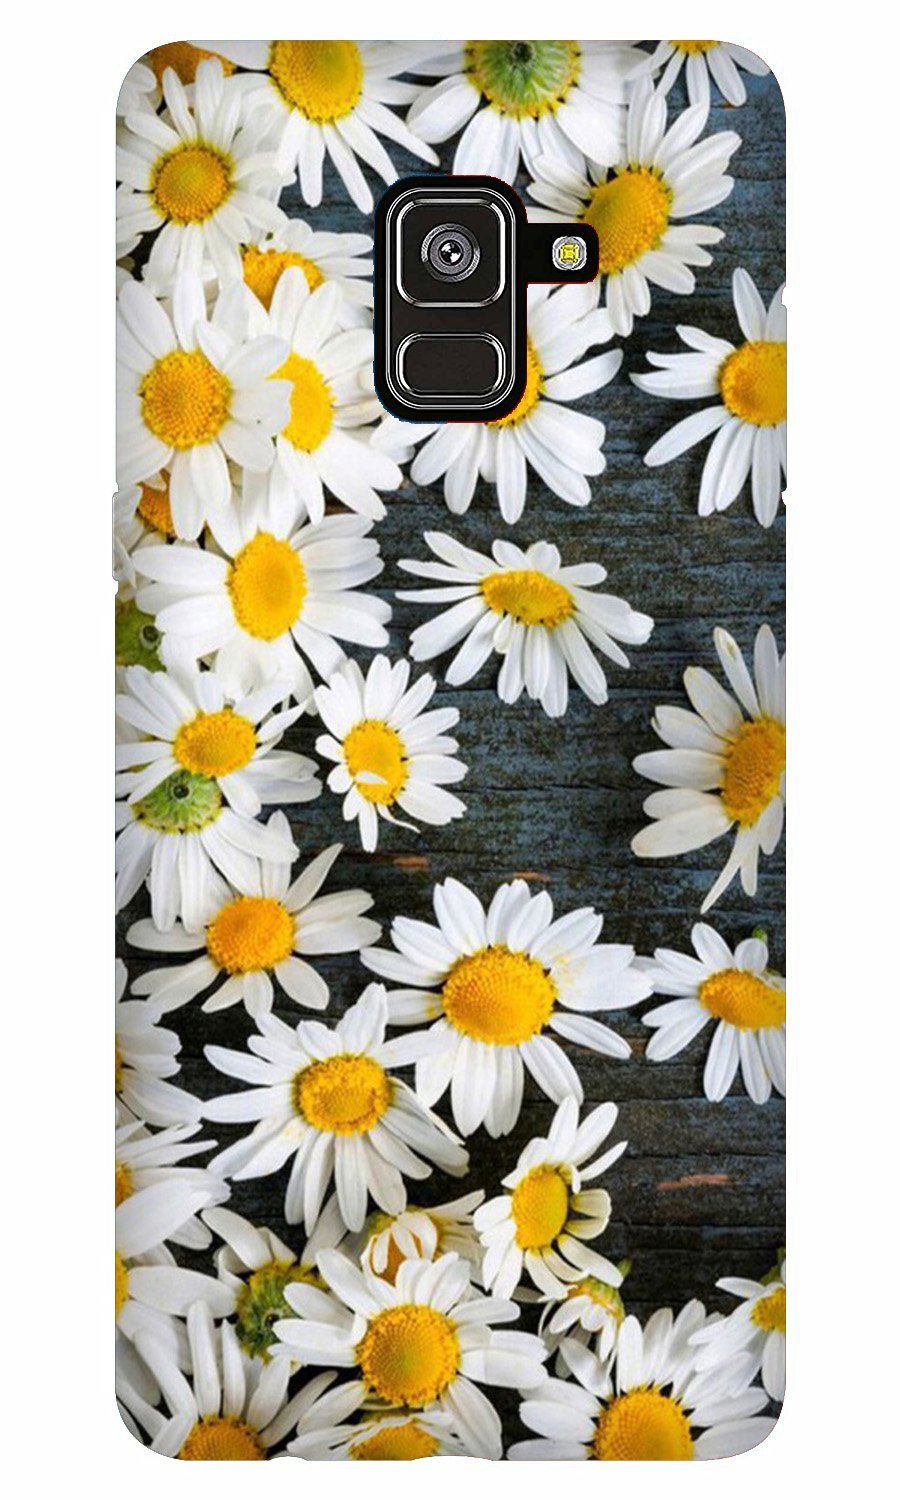 White flowers2 Case for Galaxy A8 Plus